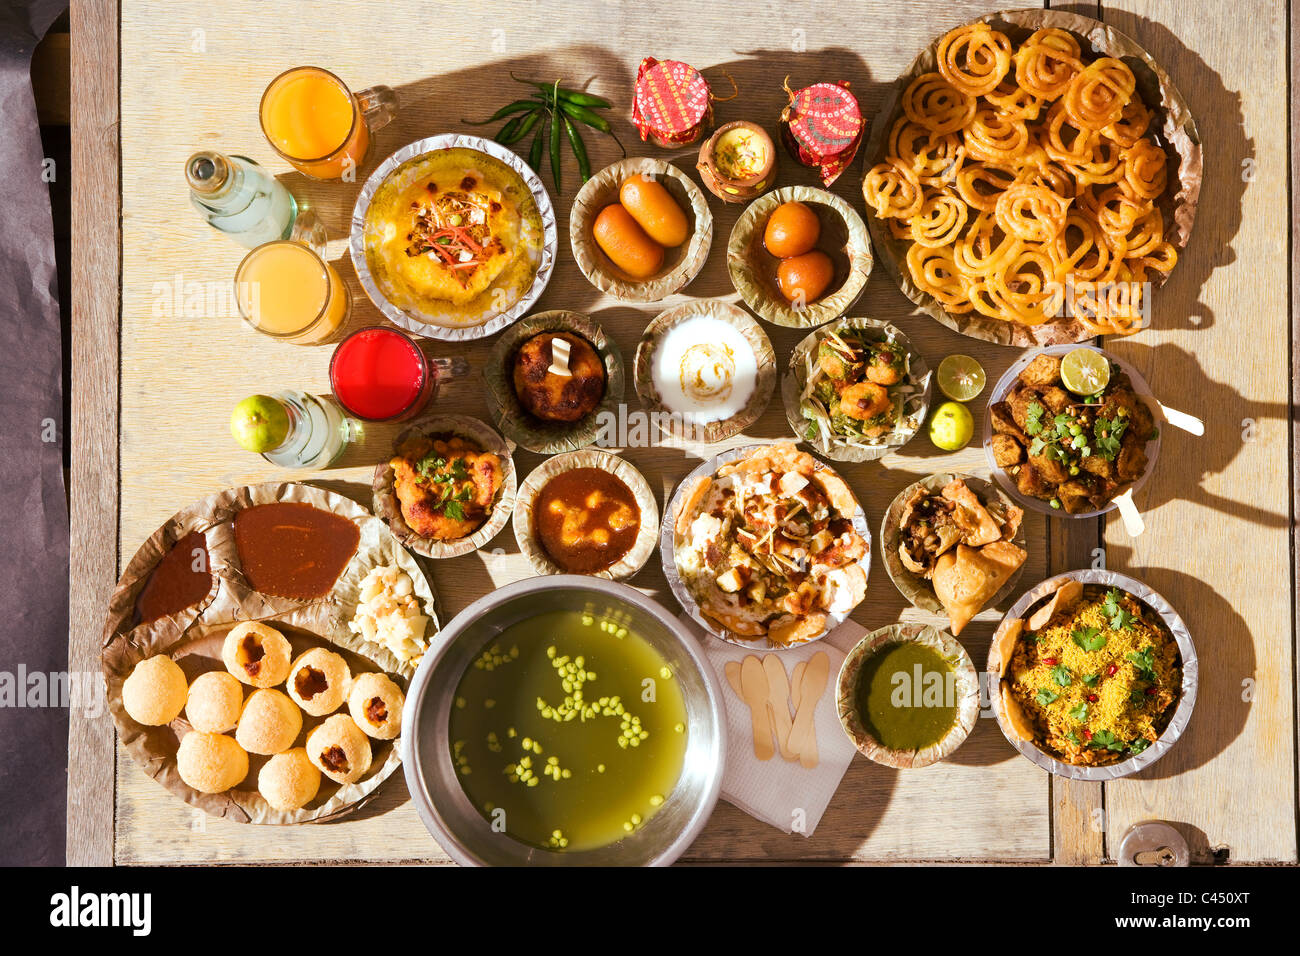 Assorted Indian fast food on table Stock Photo